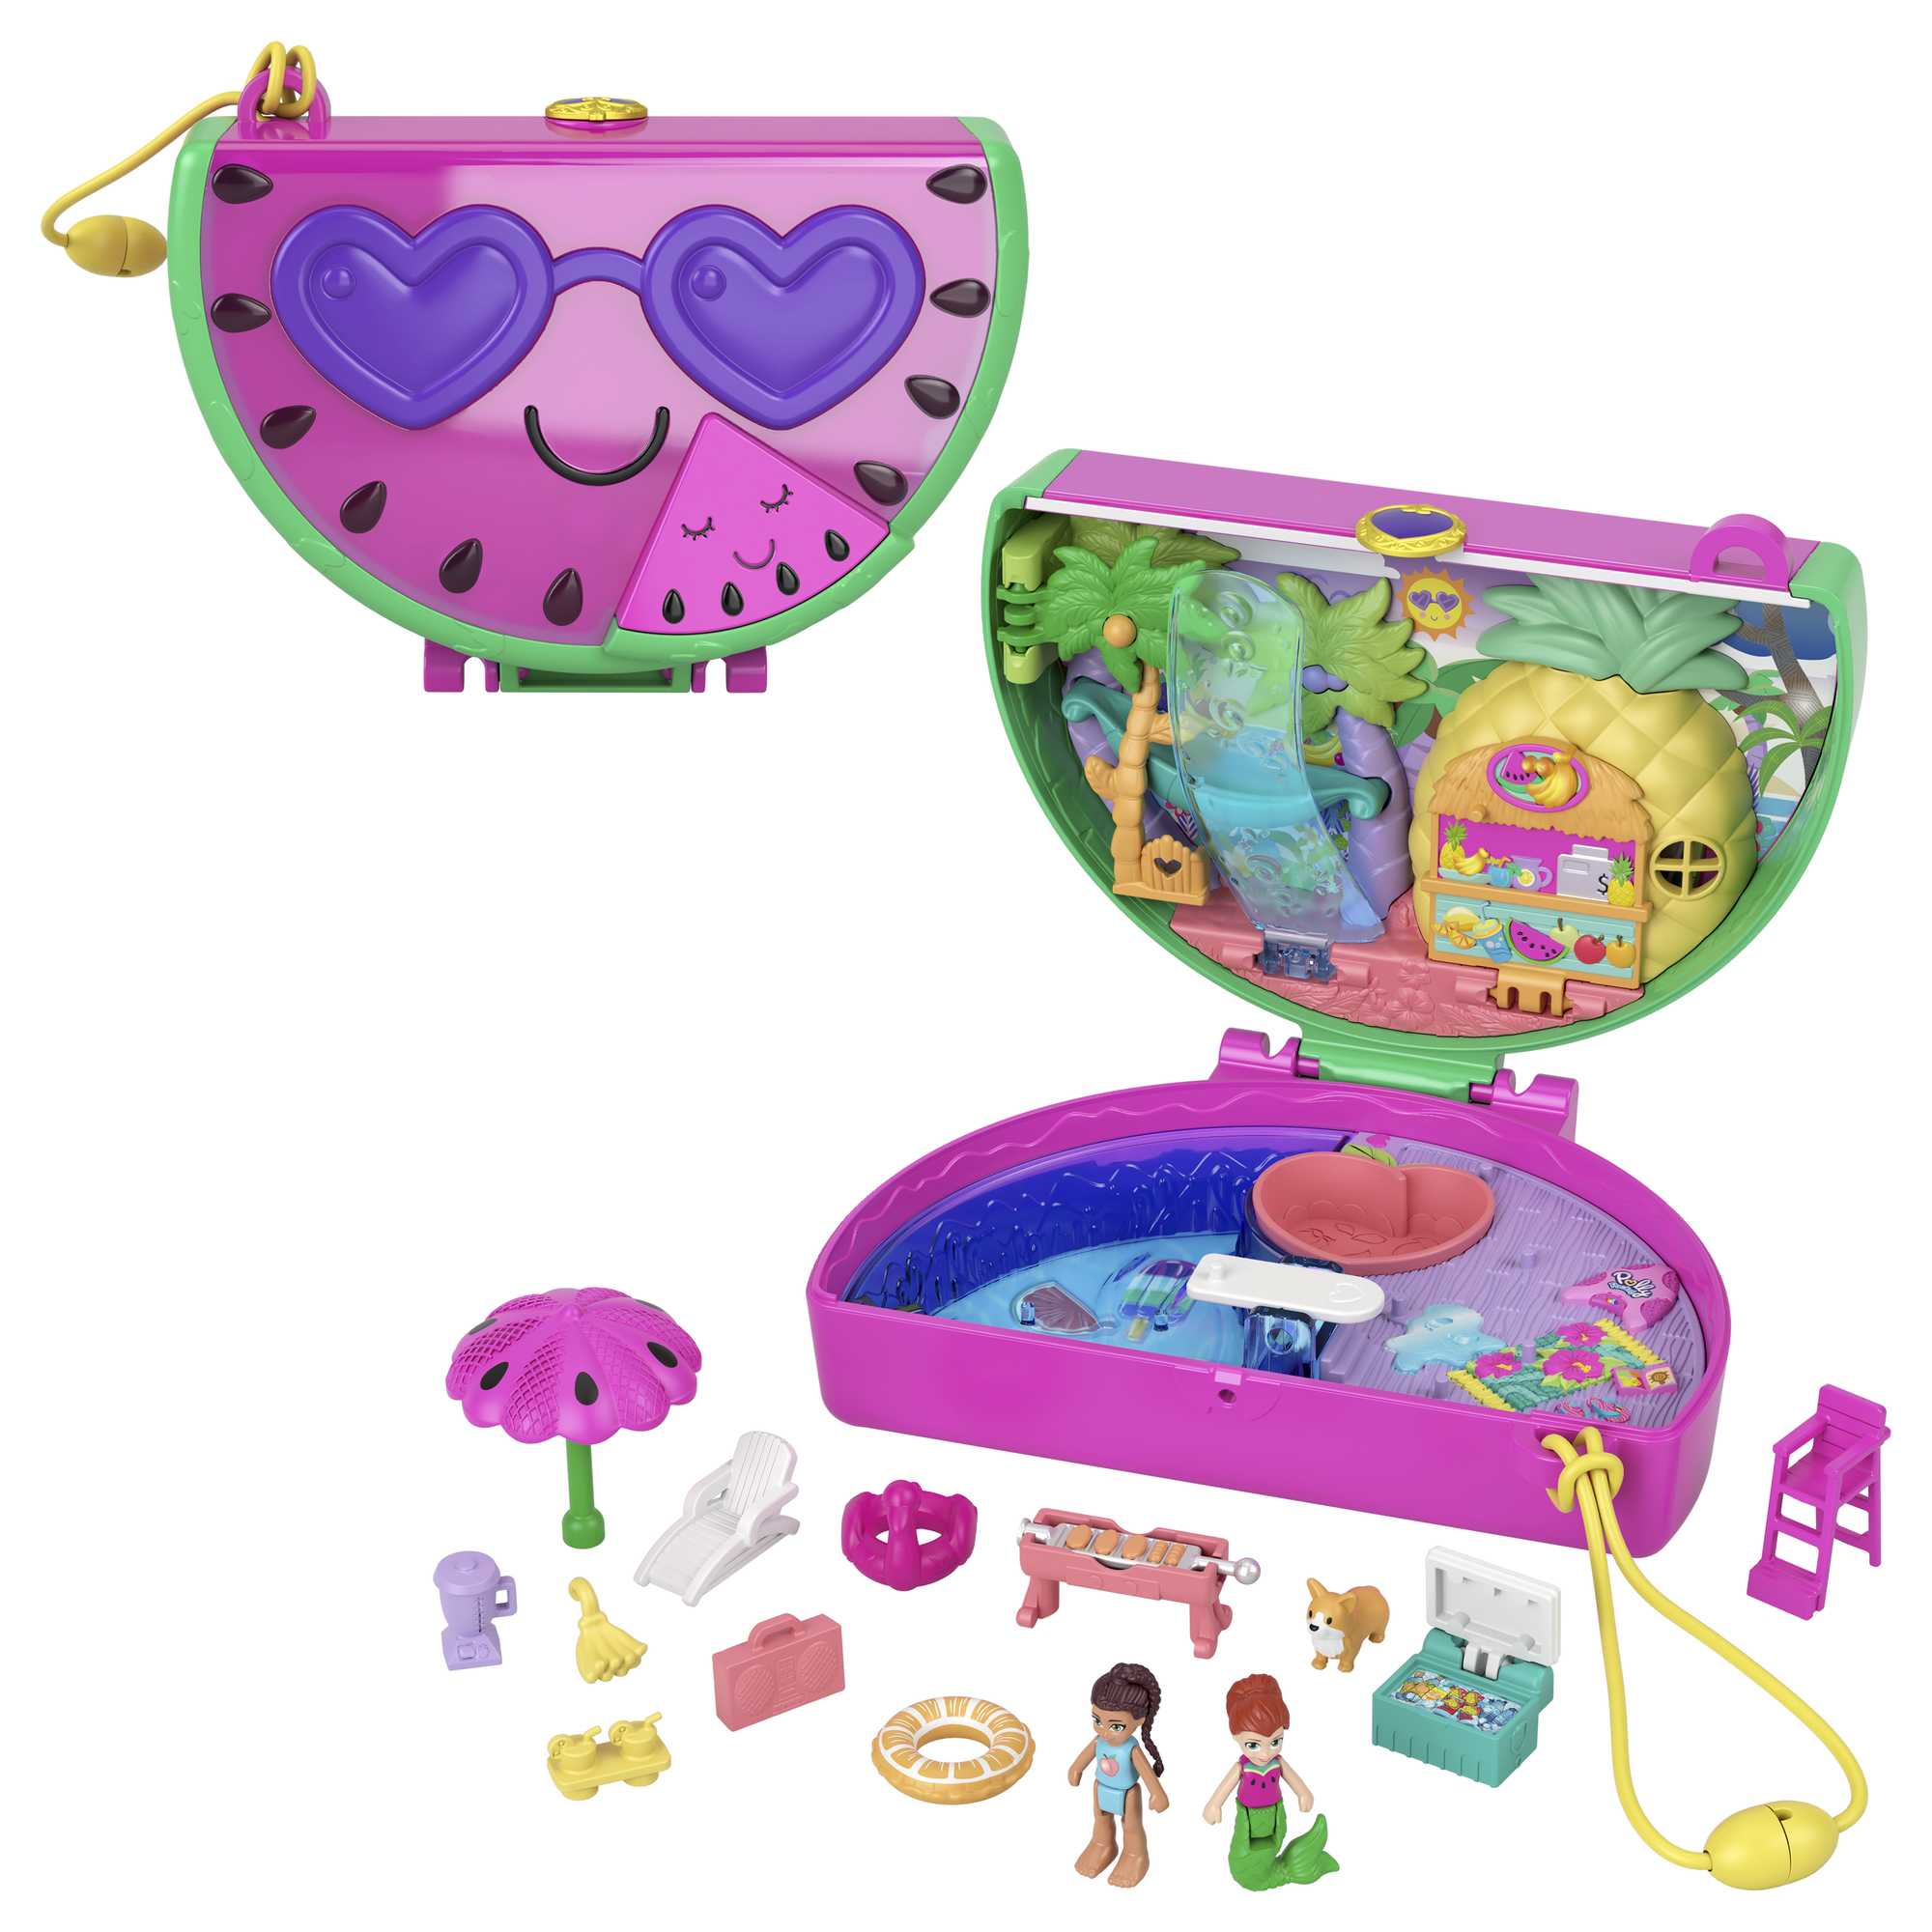 POLLY POCKET THEME PARK BACKPACK - THE TOY STORE